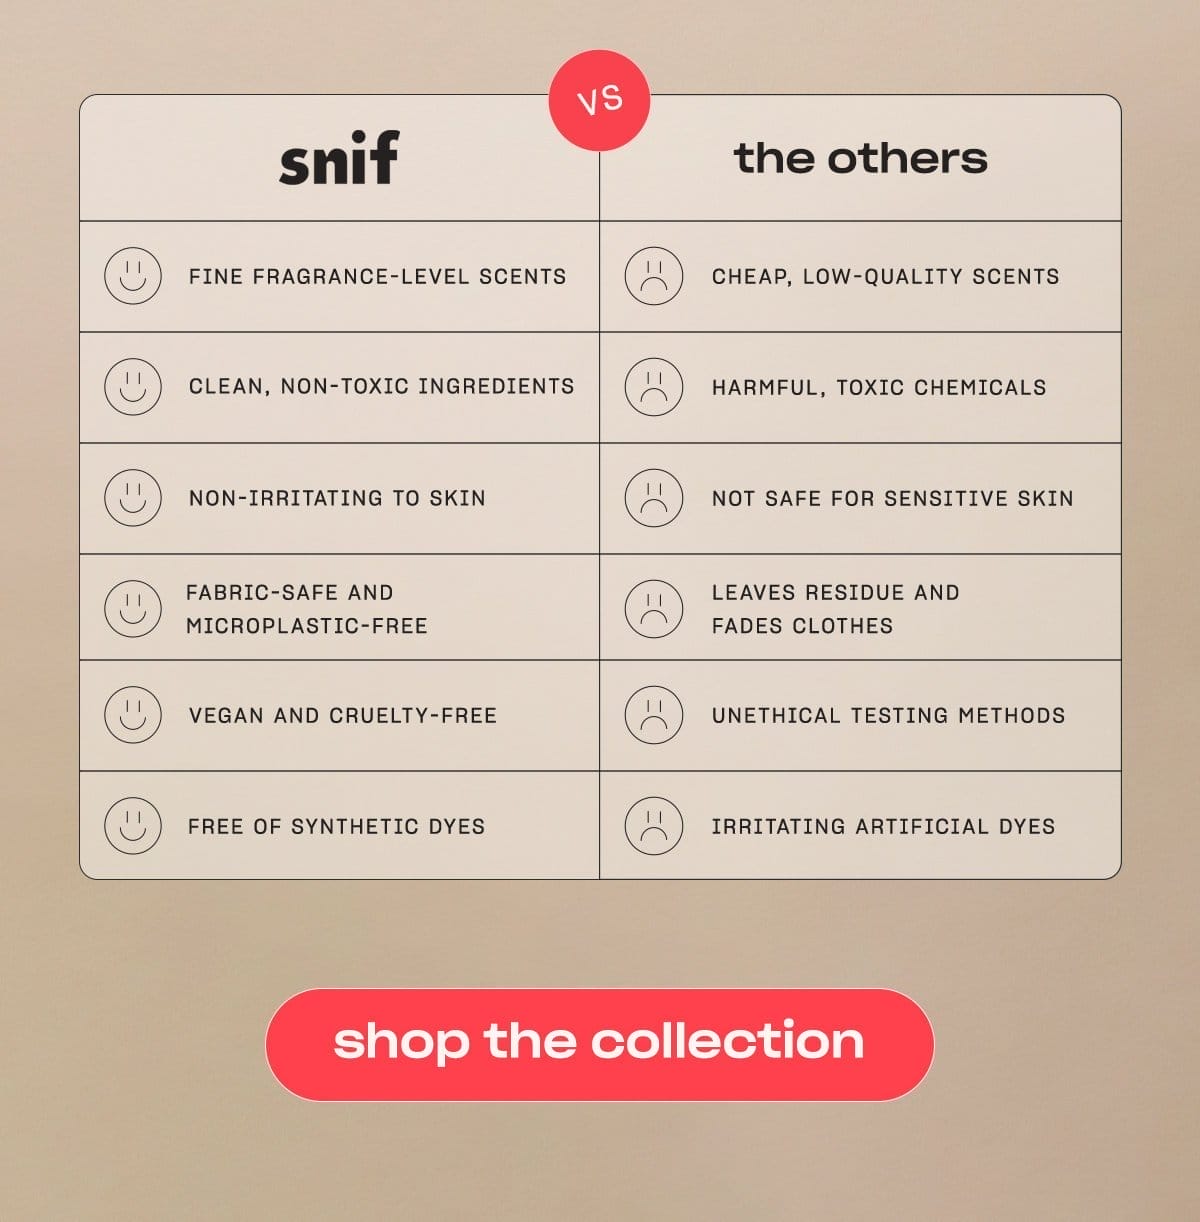 snif - fine fragrance-level scents - clean, non-toxic ingredients - non-irritating to skin - fabric-safe and microplastic-free - vegan and cruelty-free - free of synthetic dyes the others - cheap, low-quality scents - harmful, toxic chemicals - not safe for sensitive skin - leaves residue and fades clothes - unethical testing methods - irritating artificial dyes [shop the collection]